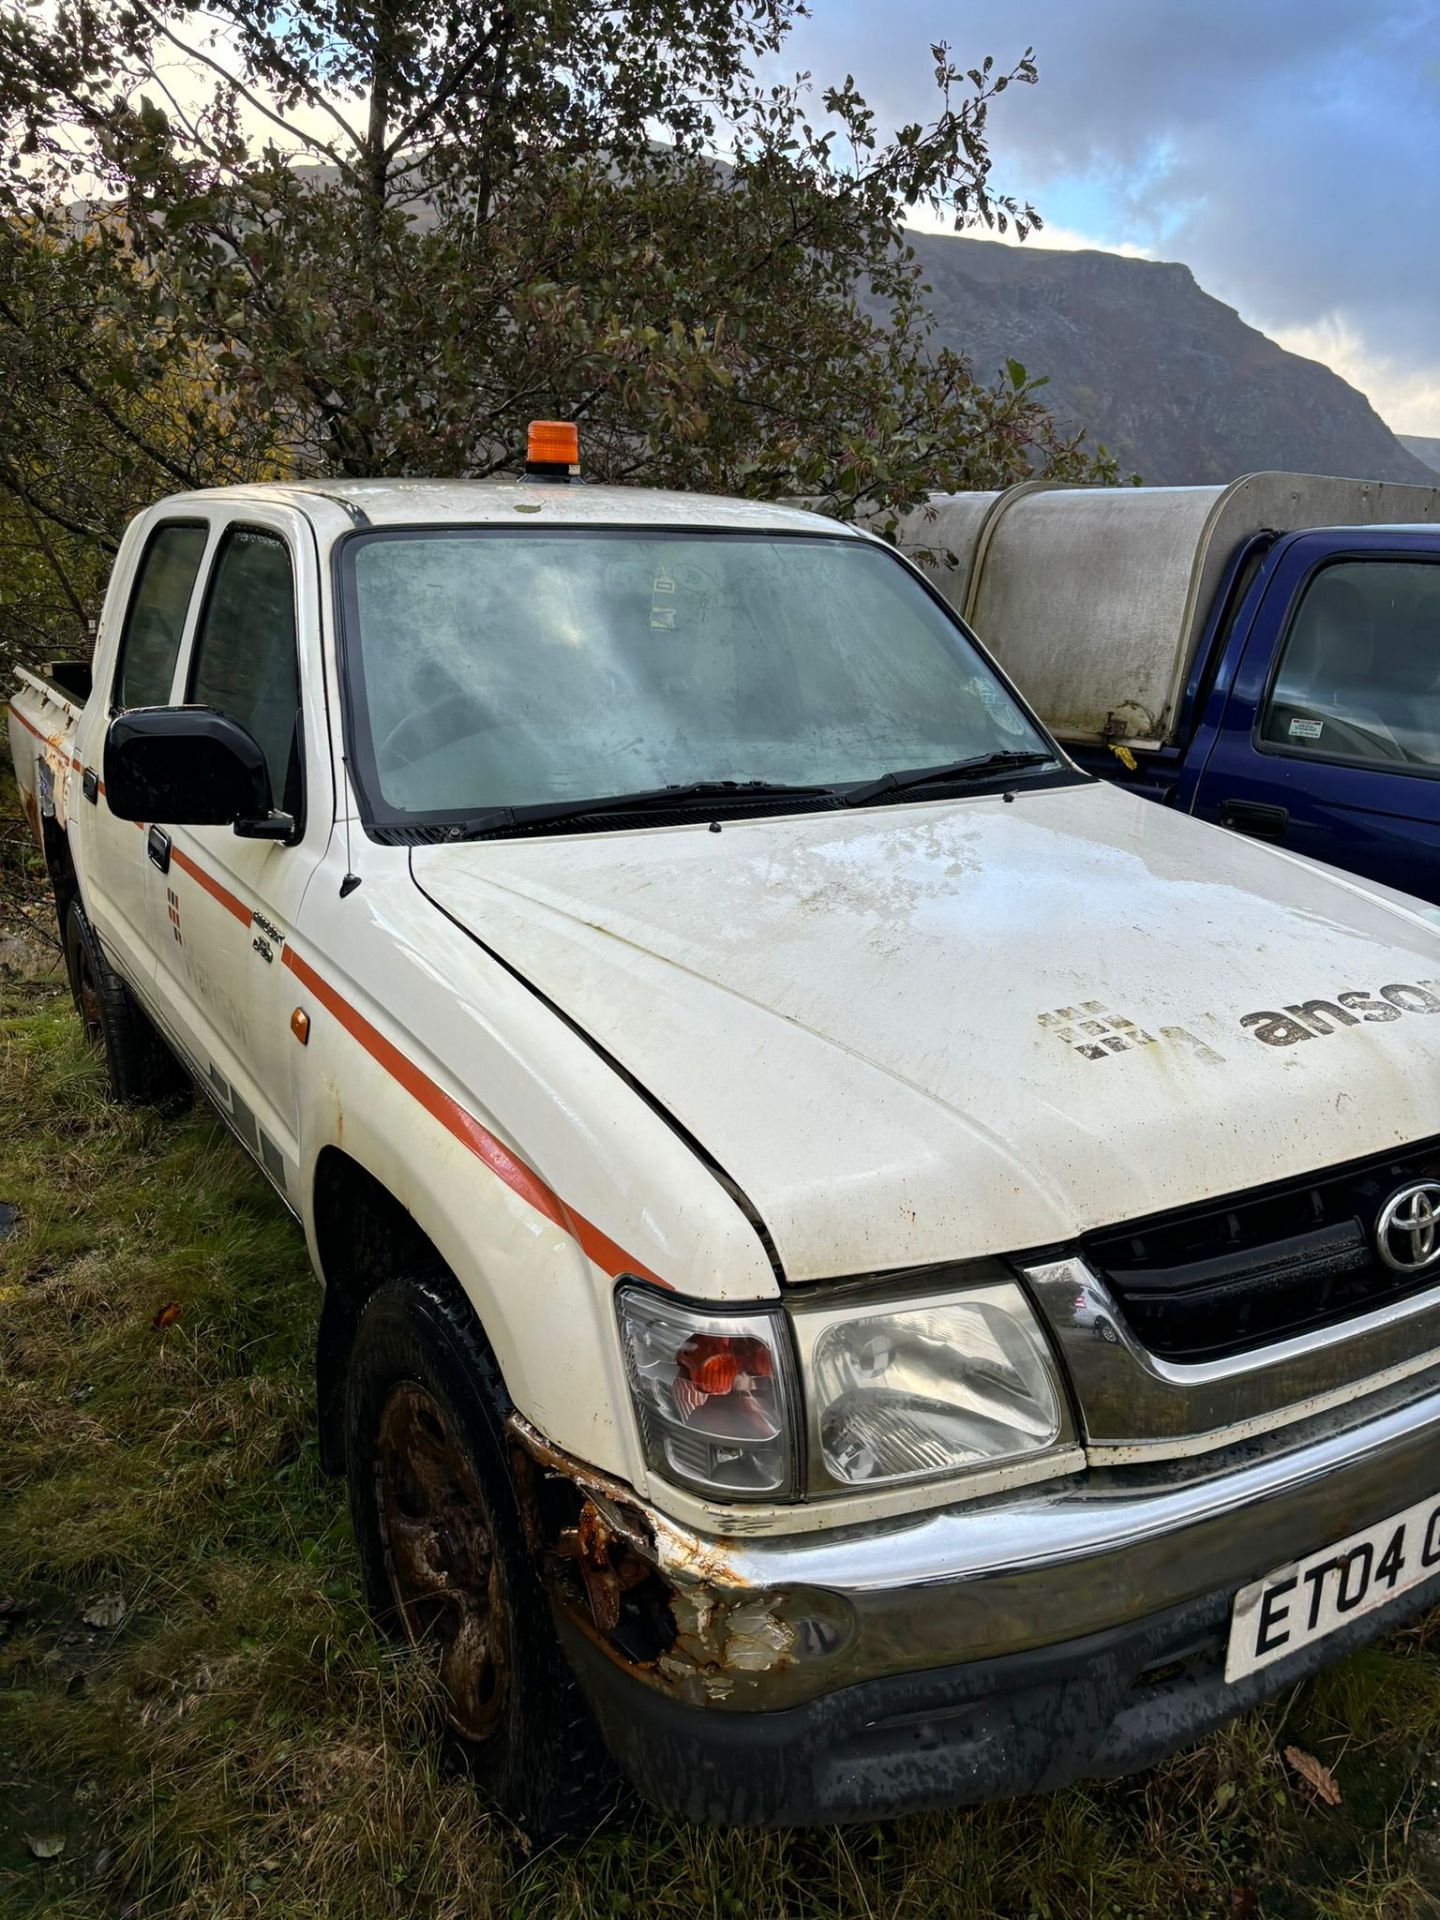 TOYOT HILUX DOUBLE CAB PICKUP TRUCK 2004 4X4 - Image 2 of 4